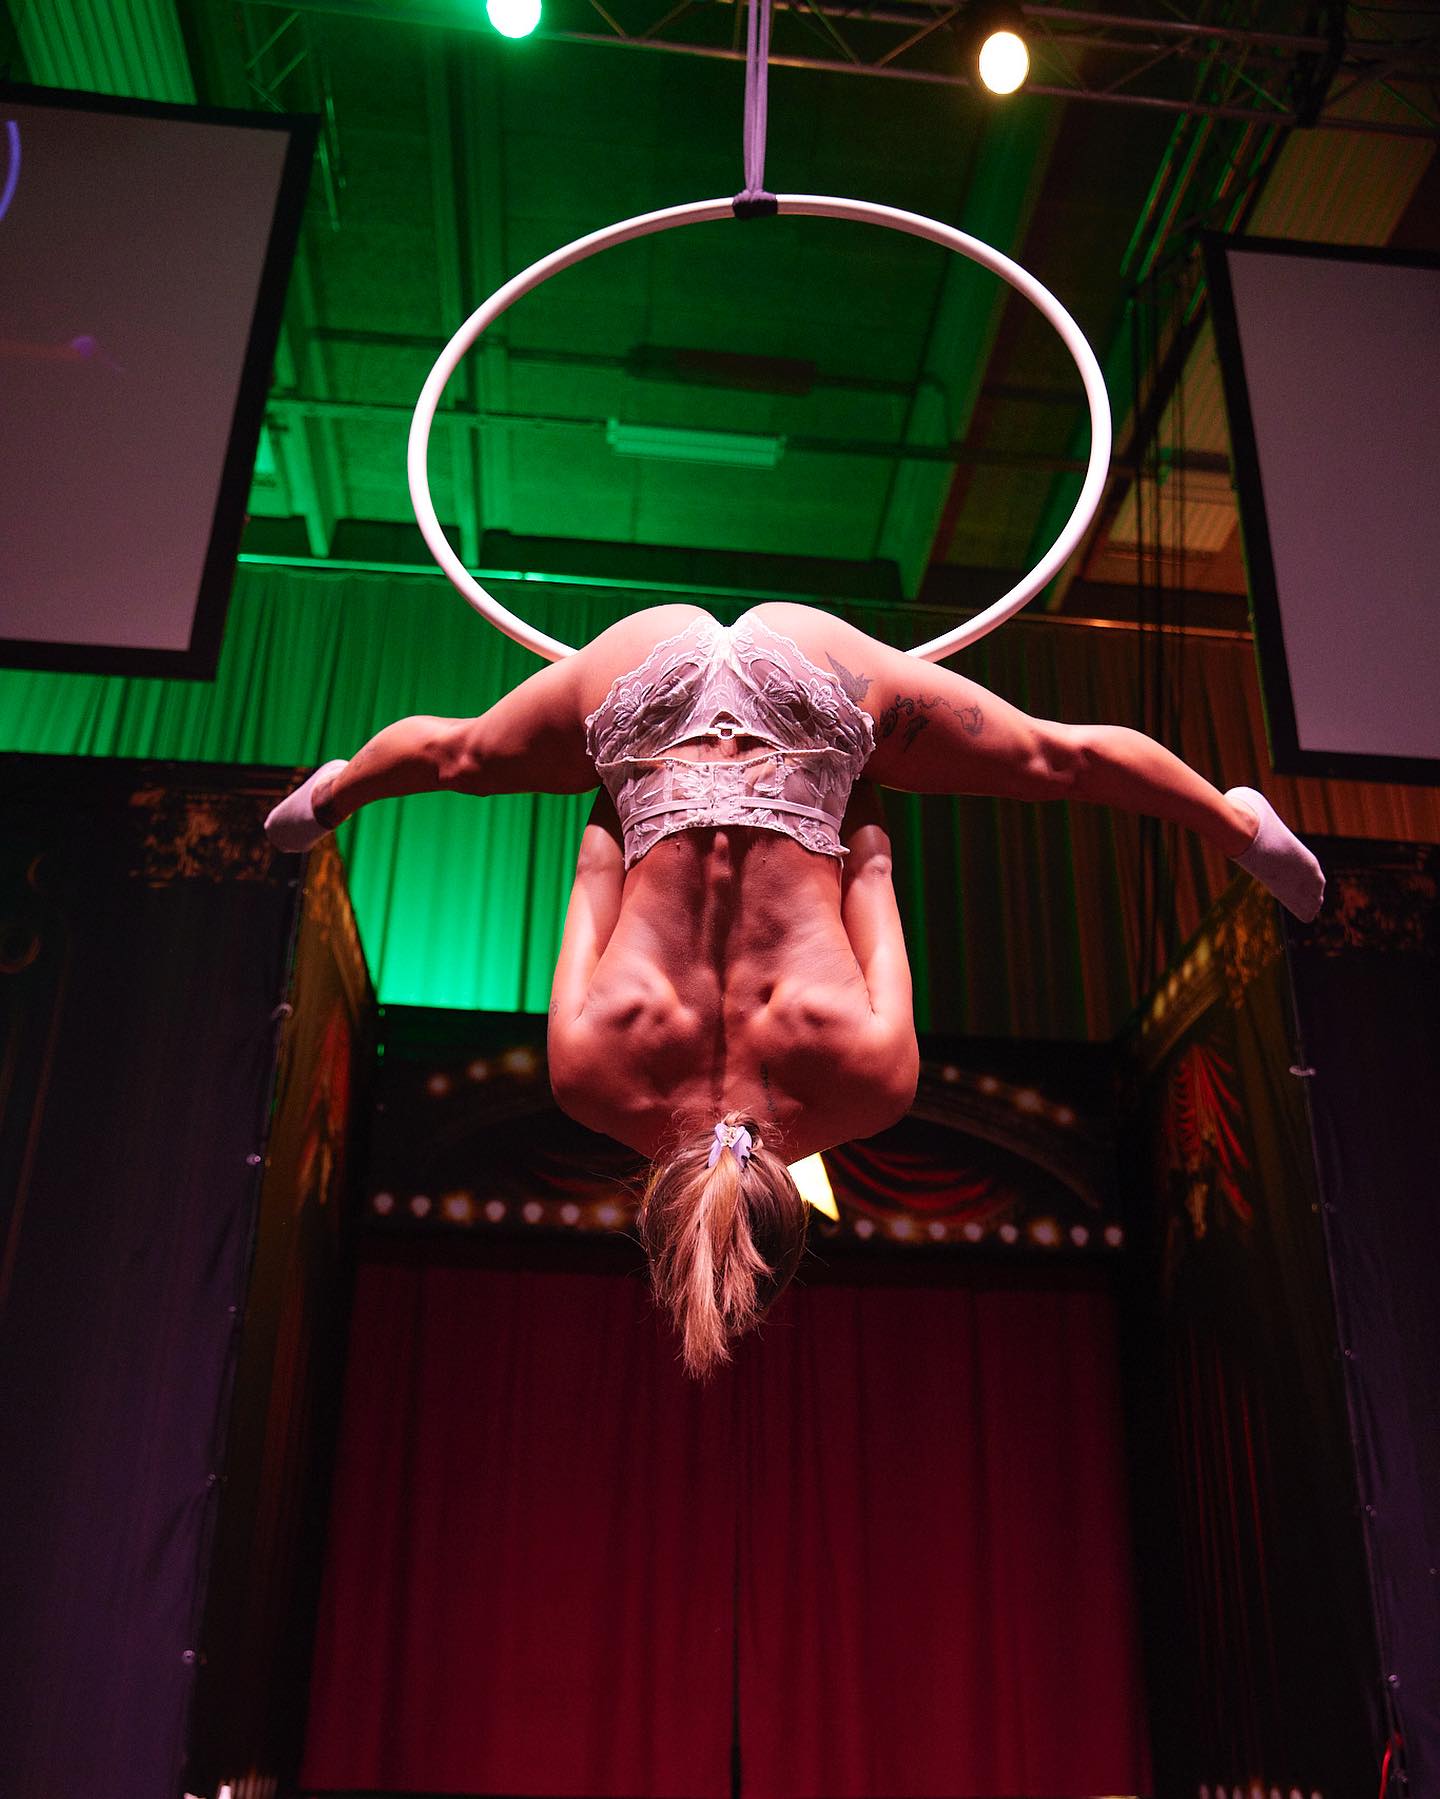 Stageshow @eroticworld.dk  #happy #lovely #joy #positivity #fyp #follow #viral #foryoupage #cute #viral #trending #trendingnow #outfitinspiration #outfit #style #styleinspiration #confidence #strength #energy #glamour #danishmodel #igbeauties  #fitness #danishgirl #circus #aerialhoop #aerial